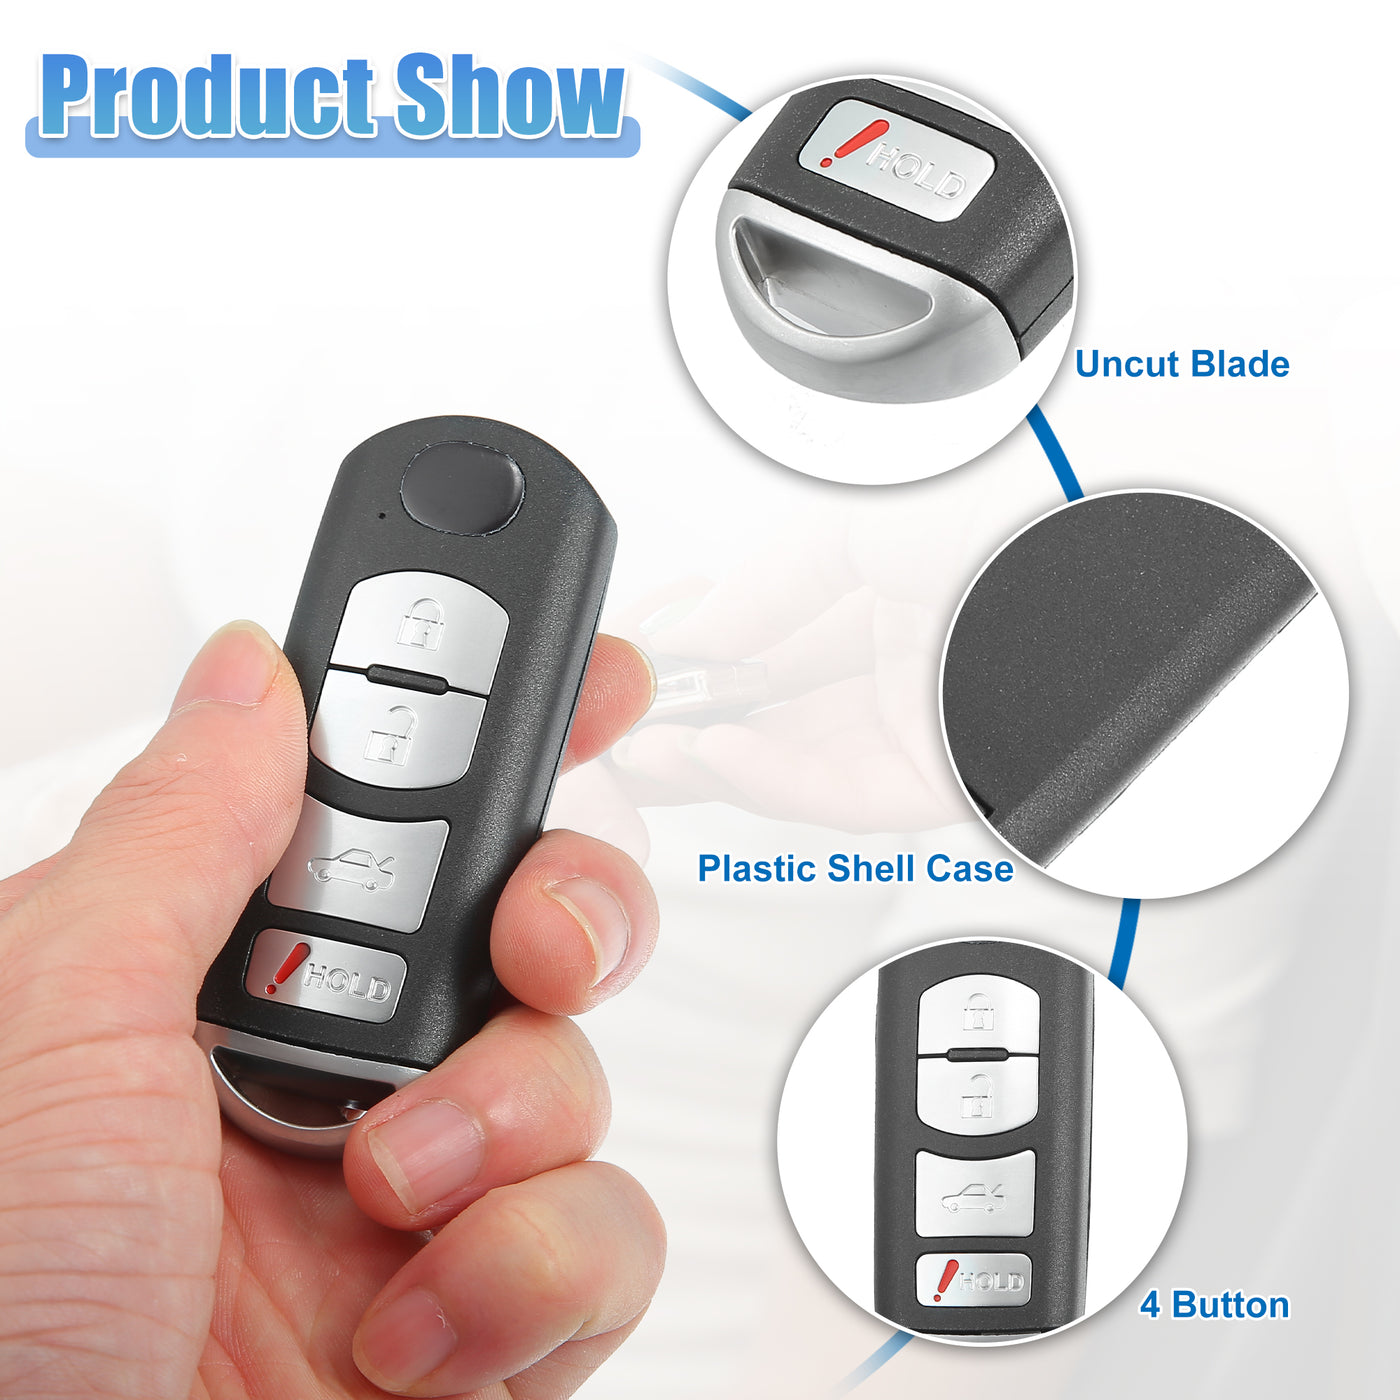 ACROPIX 315 MHz 4 Buttons SUV Keyless Entry Remote Key Fob Fit for Mazda 6 - Pack of 1 Black